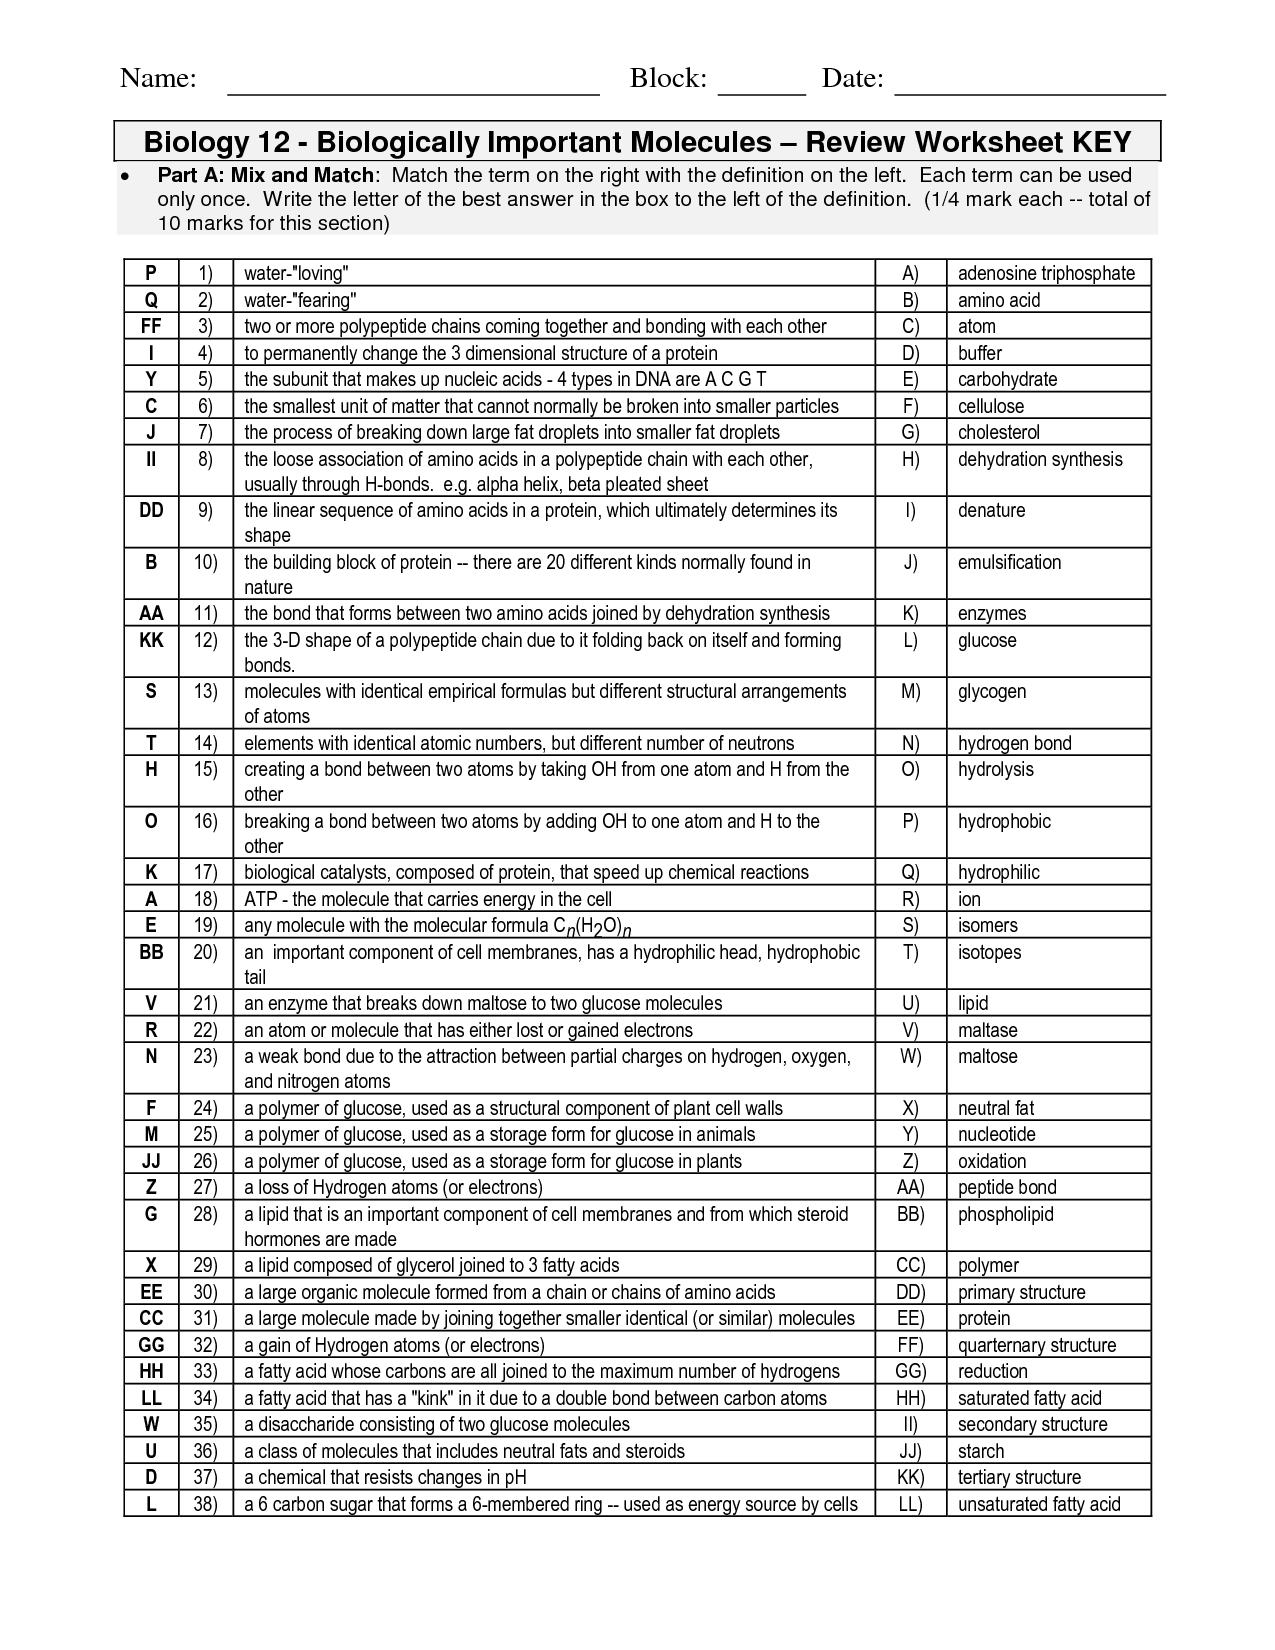 Chemistry of Carbohydrates Worksheet